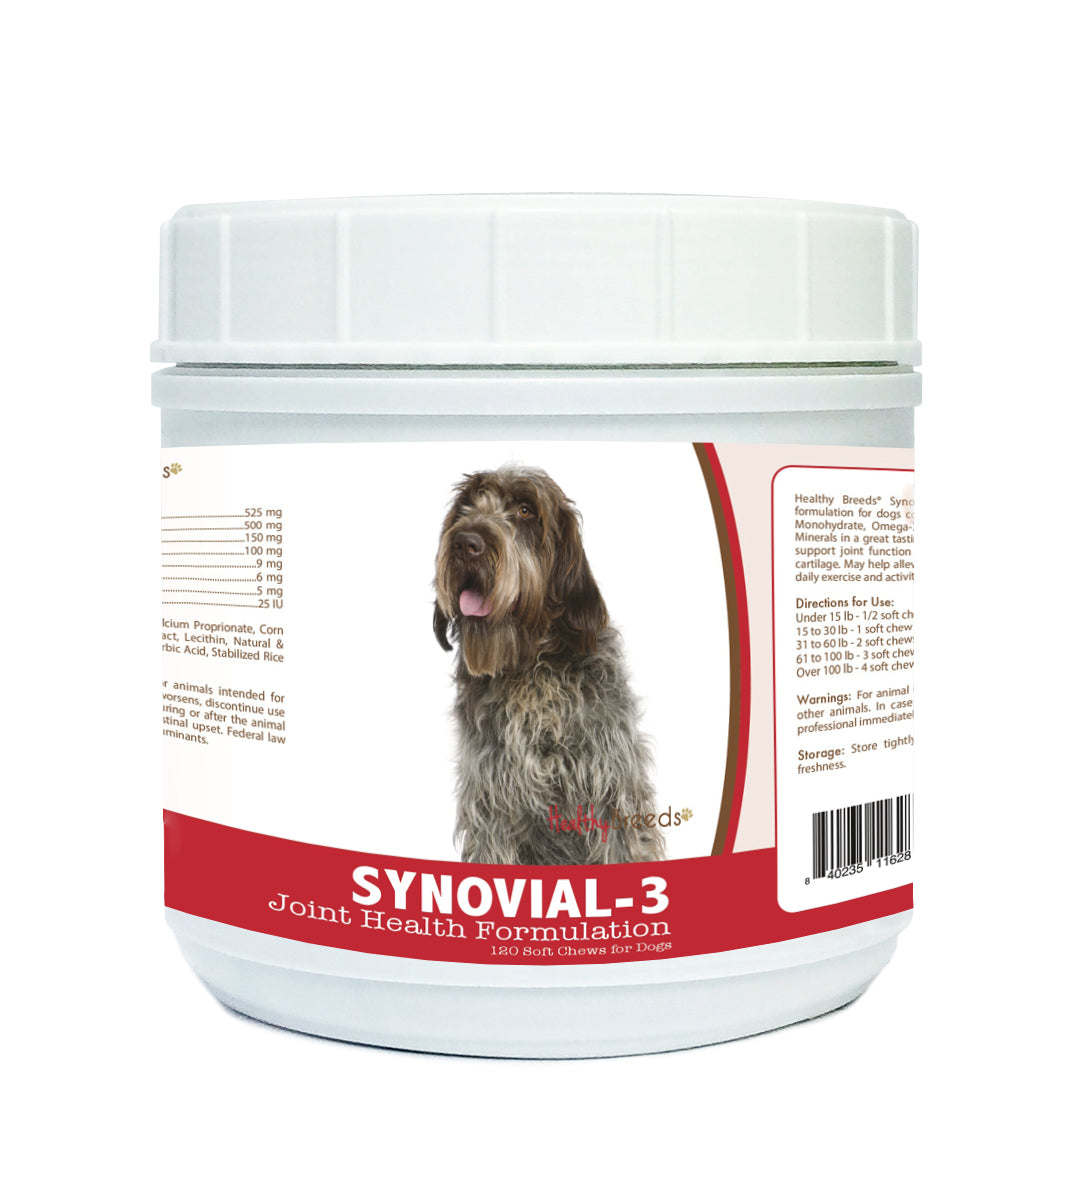 Wirehaired Pointing Griffon Synovial-3 Joint Health Formulation Soft Chews 120 Count